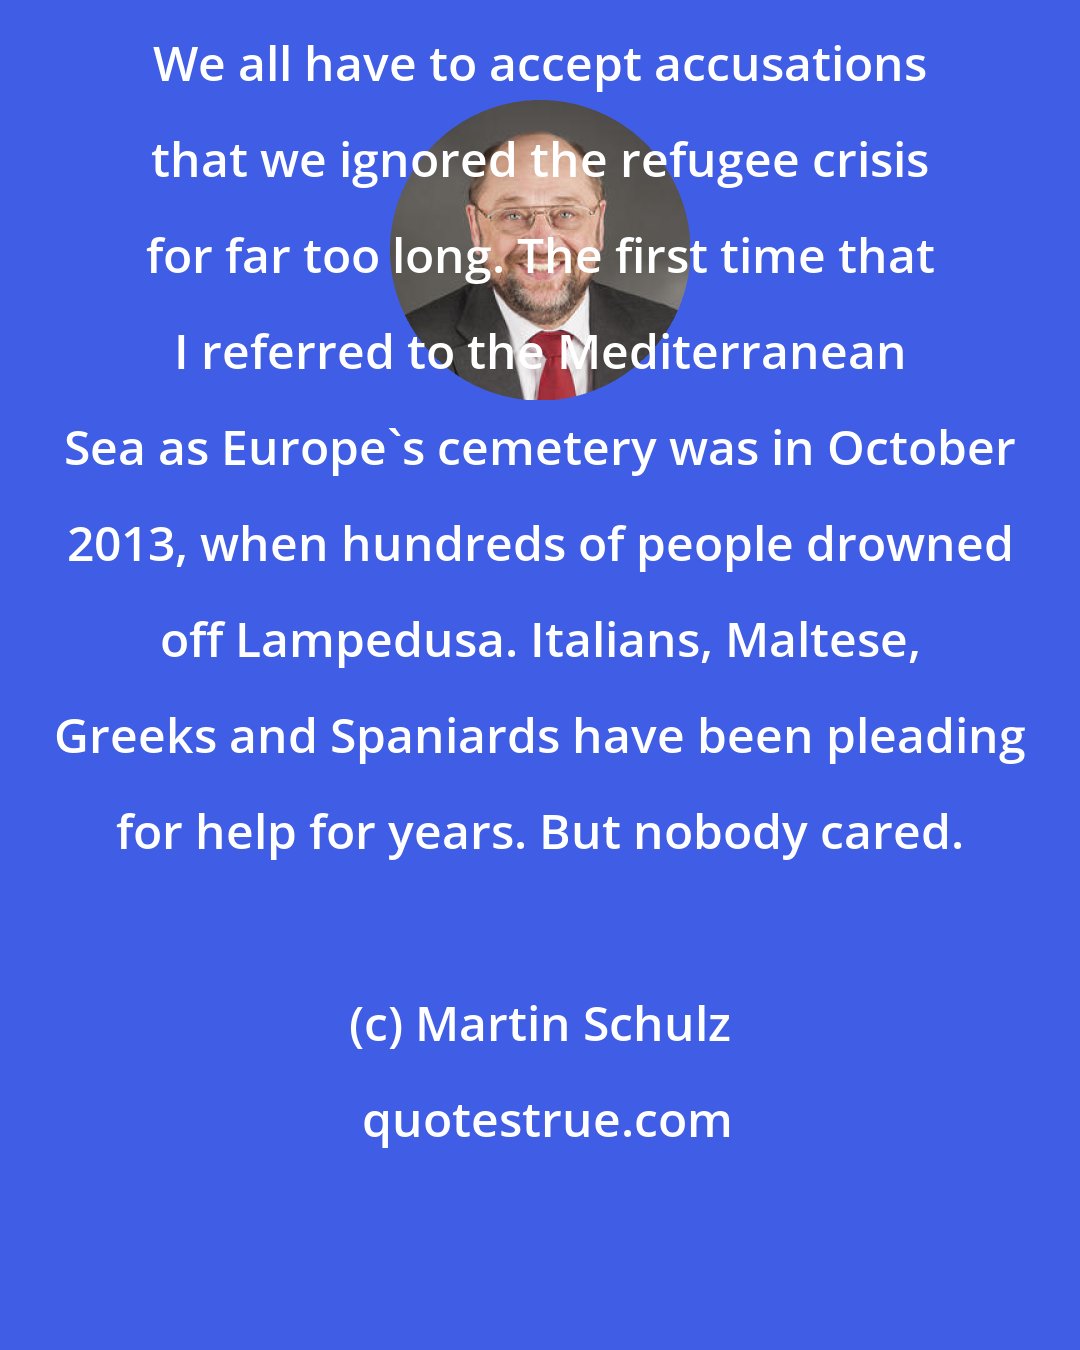 Martin Schulz: We all have to accept accusations that we ignored the refugee crisis for far too long. The first time that I referred to the Mediterranean Sea as Europe's cemetery was in October 2013, when hundreds of people drowned off Lampedusa. Italians, Maltese, Greeks and Spaniards have been pleading for help for years. But nobody cared.